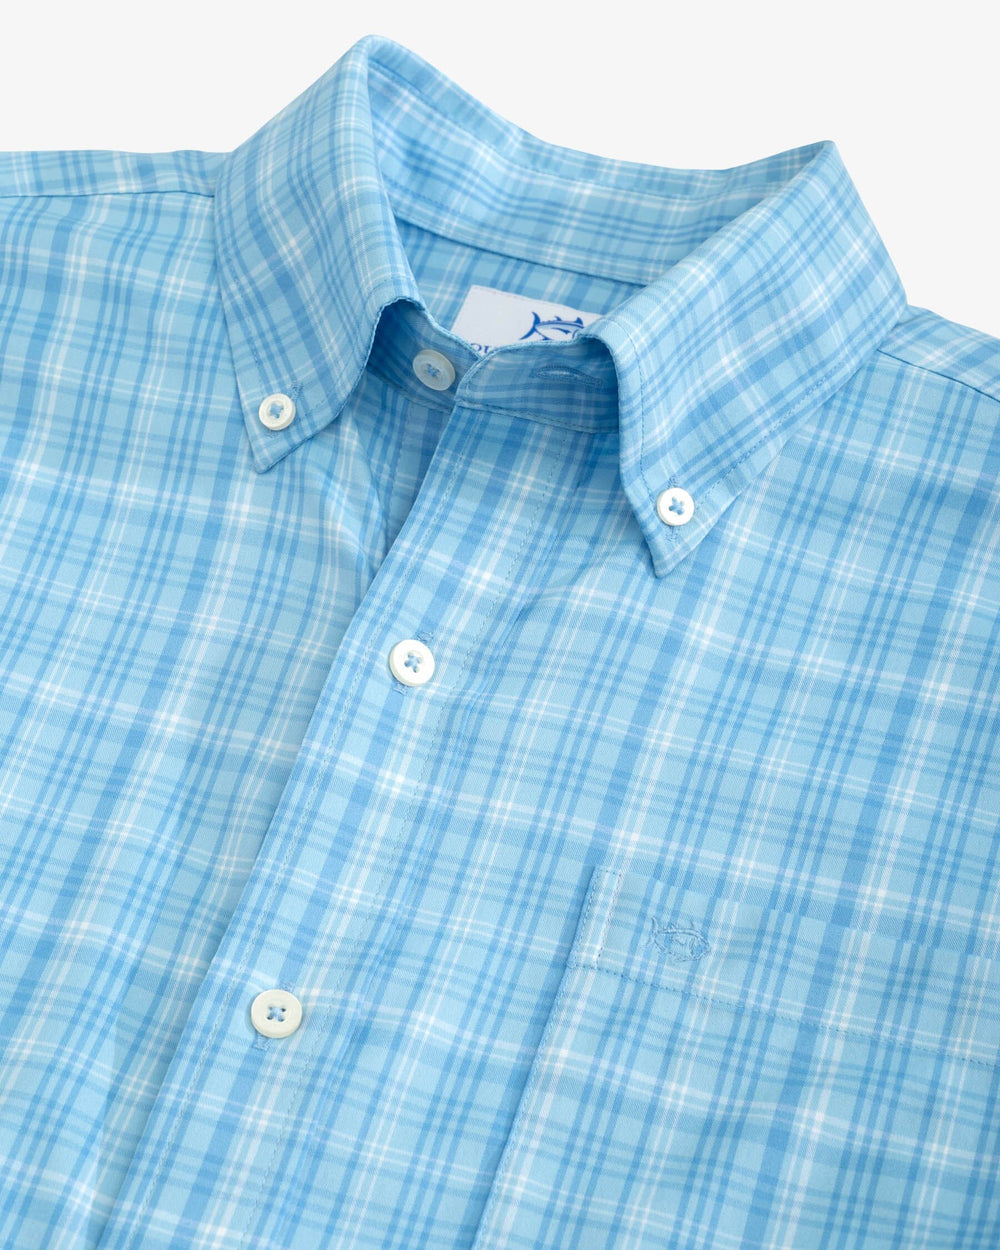 The detail view of the Southern Tide Keowee Plaid Intercoastal Sport Shirt by Southern Tide - Rain Water